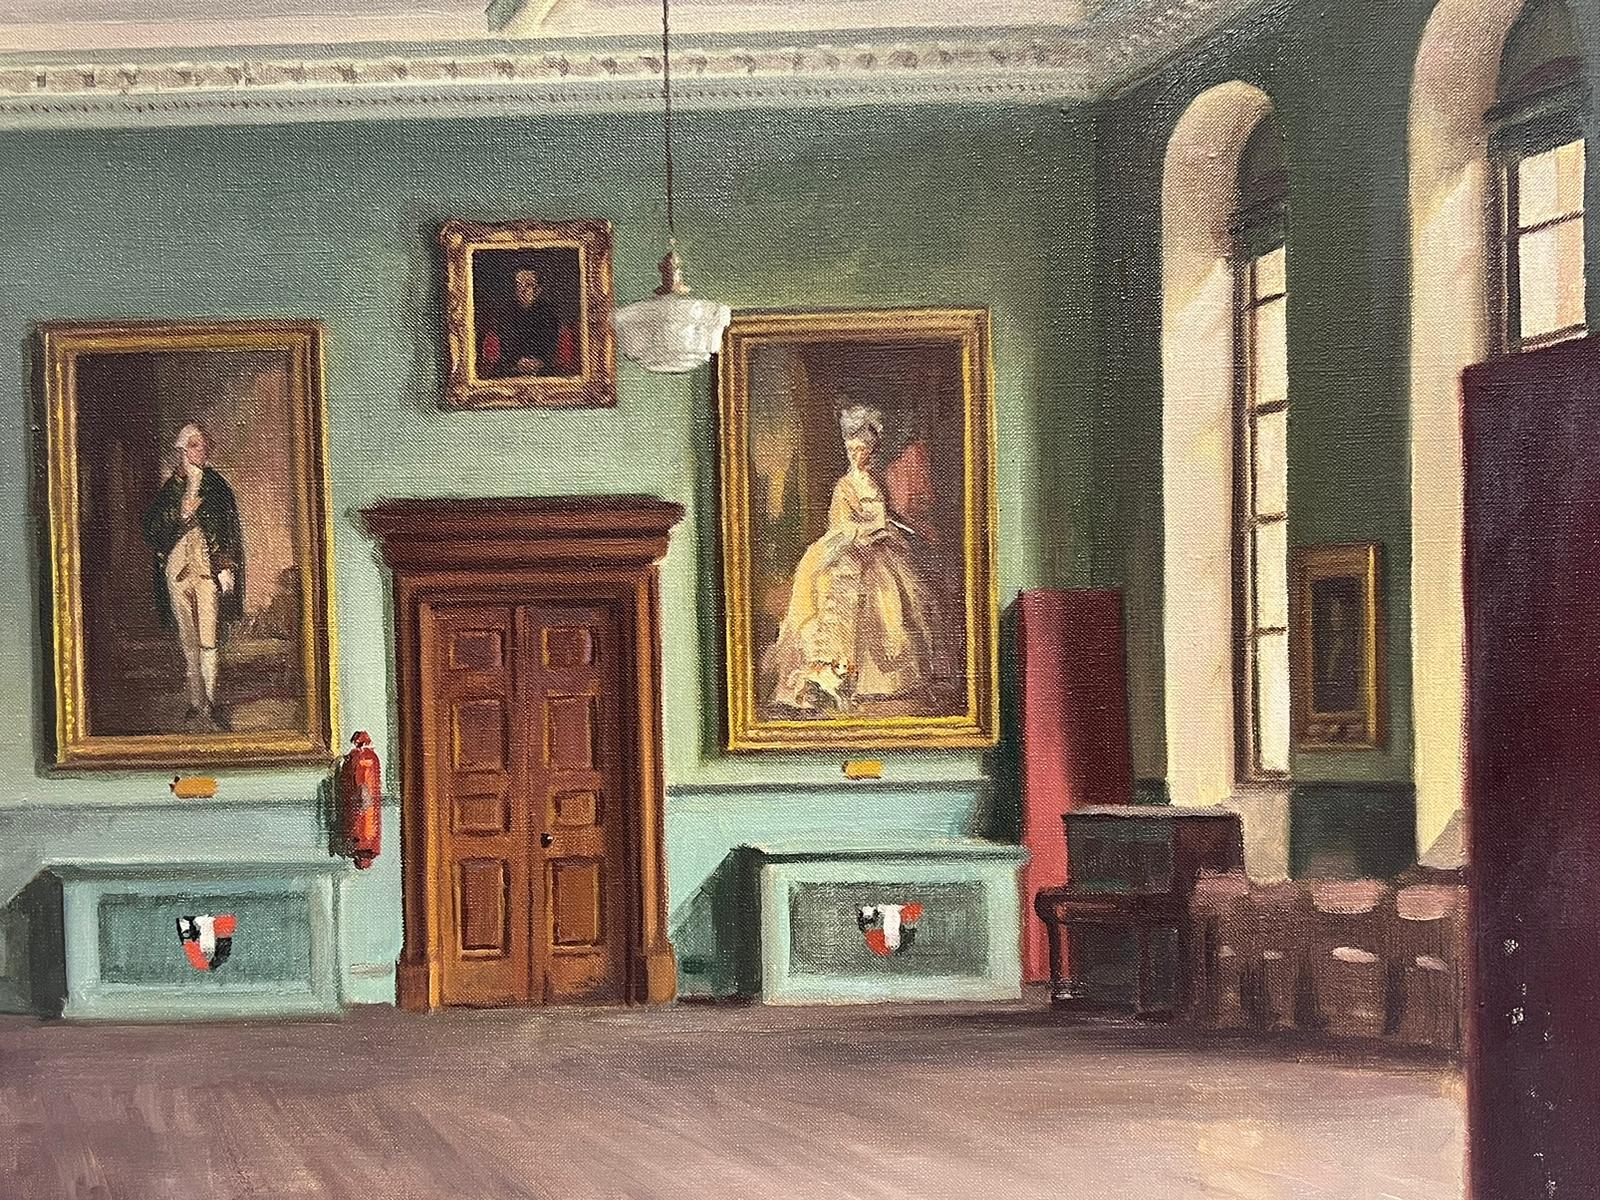 The Guildhall, Worcester
English School, mid 20th century
indistinctly signed verso
oil on canvas
canvas: 20 x 24 inches
provenance: private collection, UK
condition: very good and sound condition

The Worcester Guildhall was originally built as a